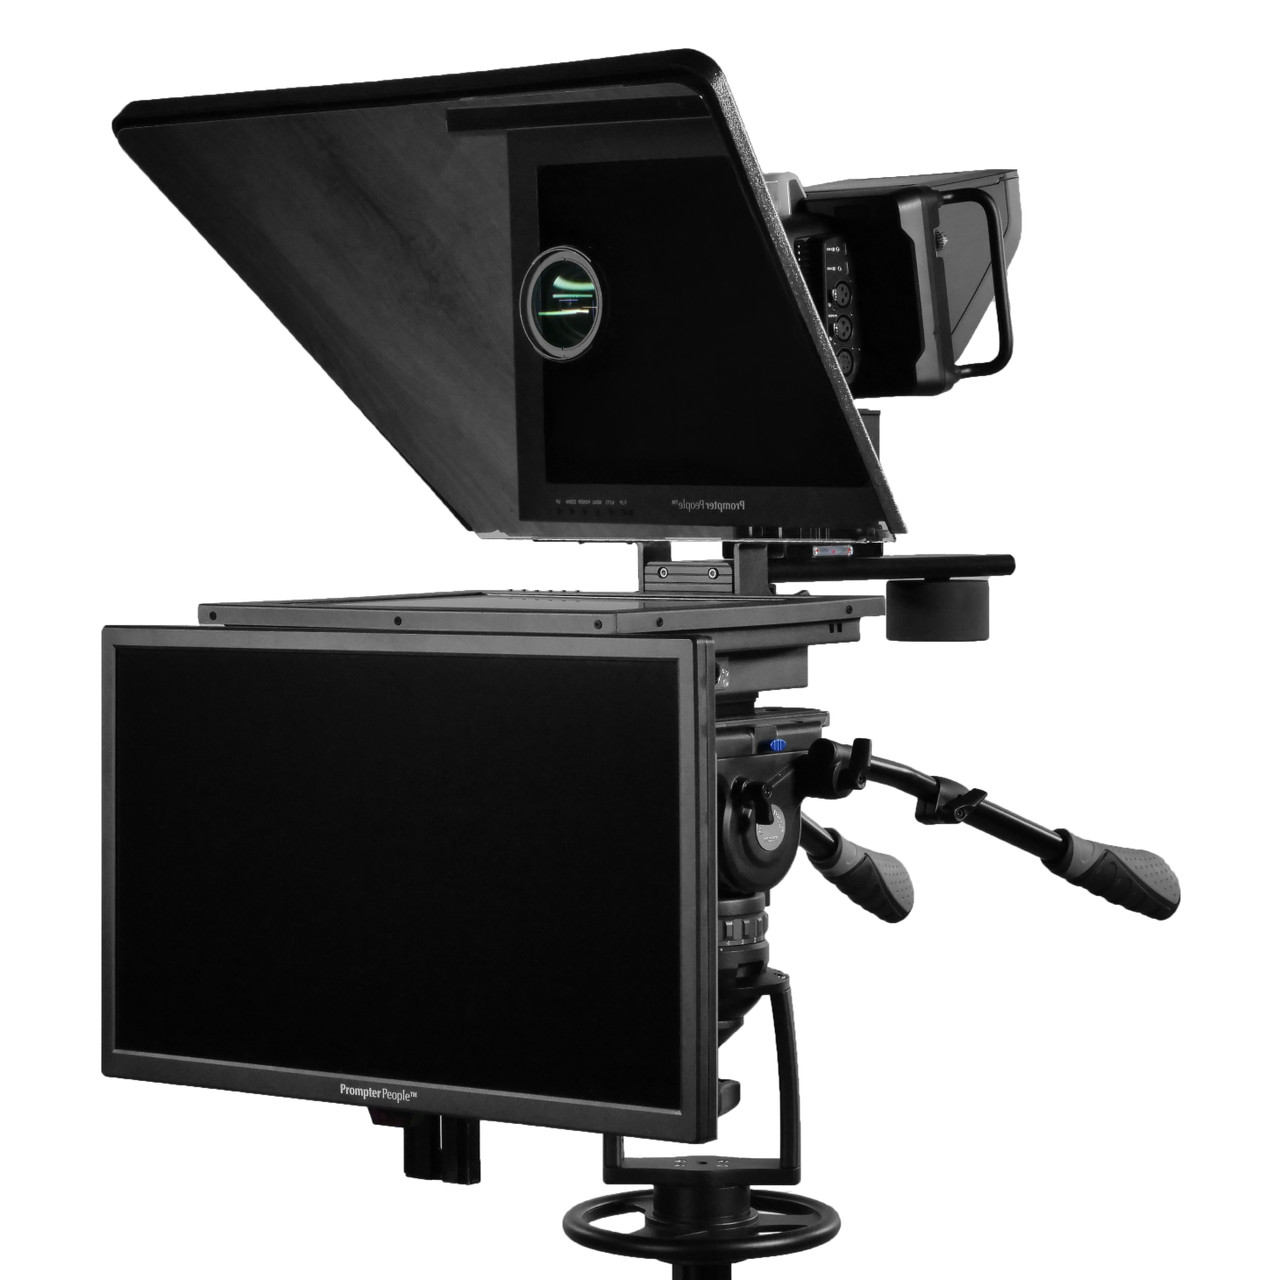 Flex Plus Talent Monitor Teleprompter | 15" 400 NIT Regular Prompting Monitor HDMI | VGA with 21.5" Color Accurate RGB IPS 3G-SDI Talent Monitor